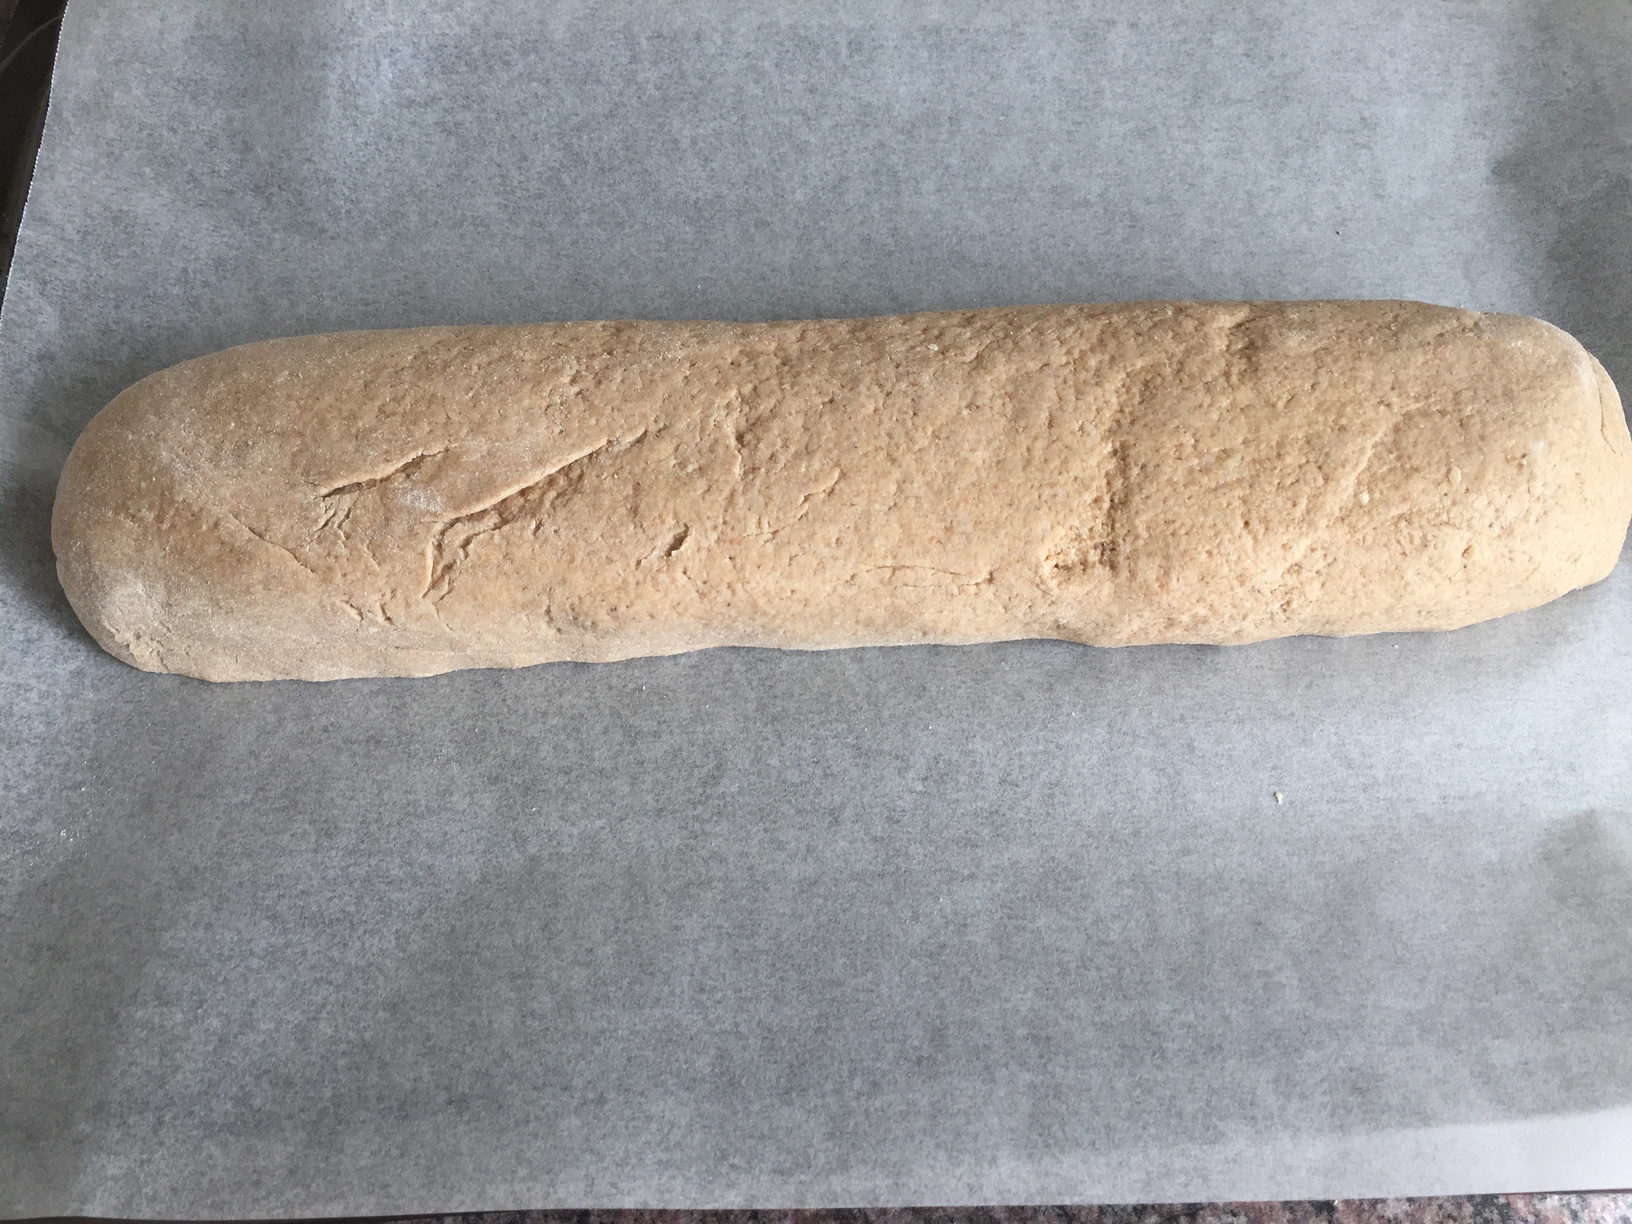 The dough shaped into a loaf to be left to prove